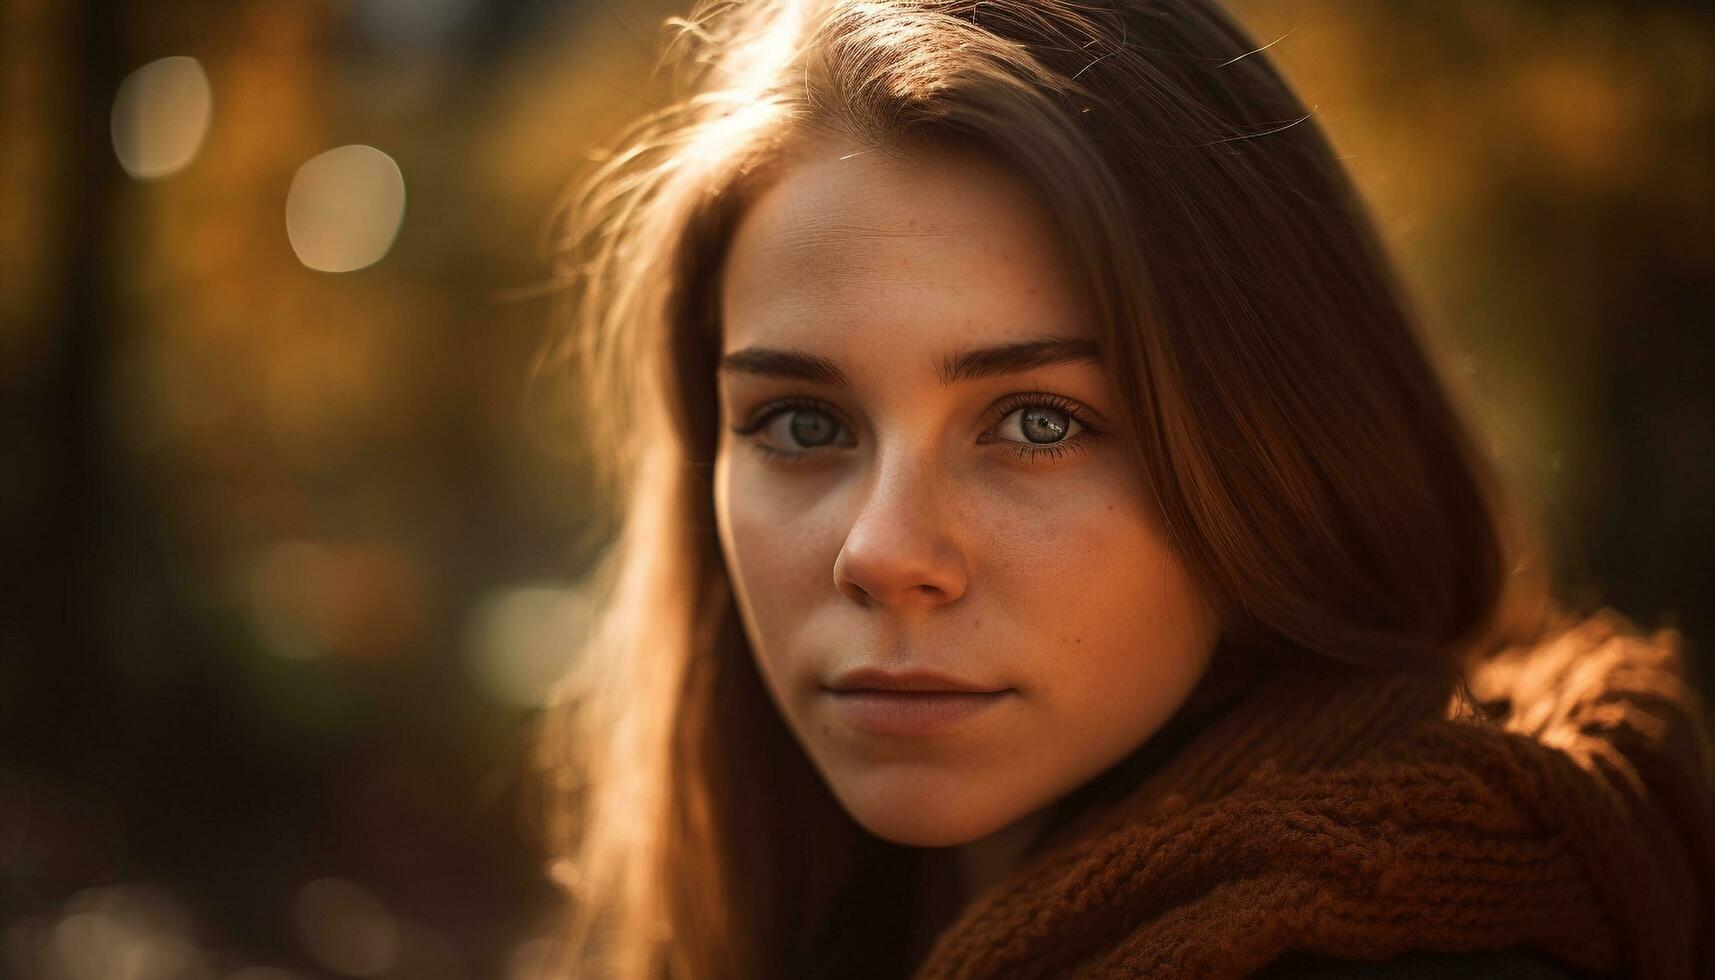 Young woman smiling, looking at camera outdoors generated by AI photo